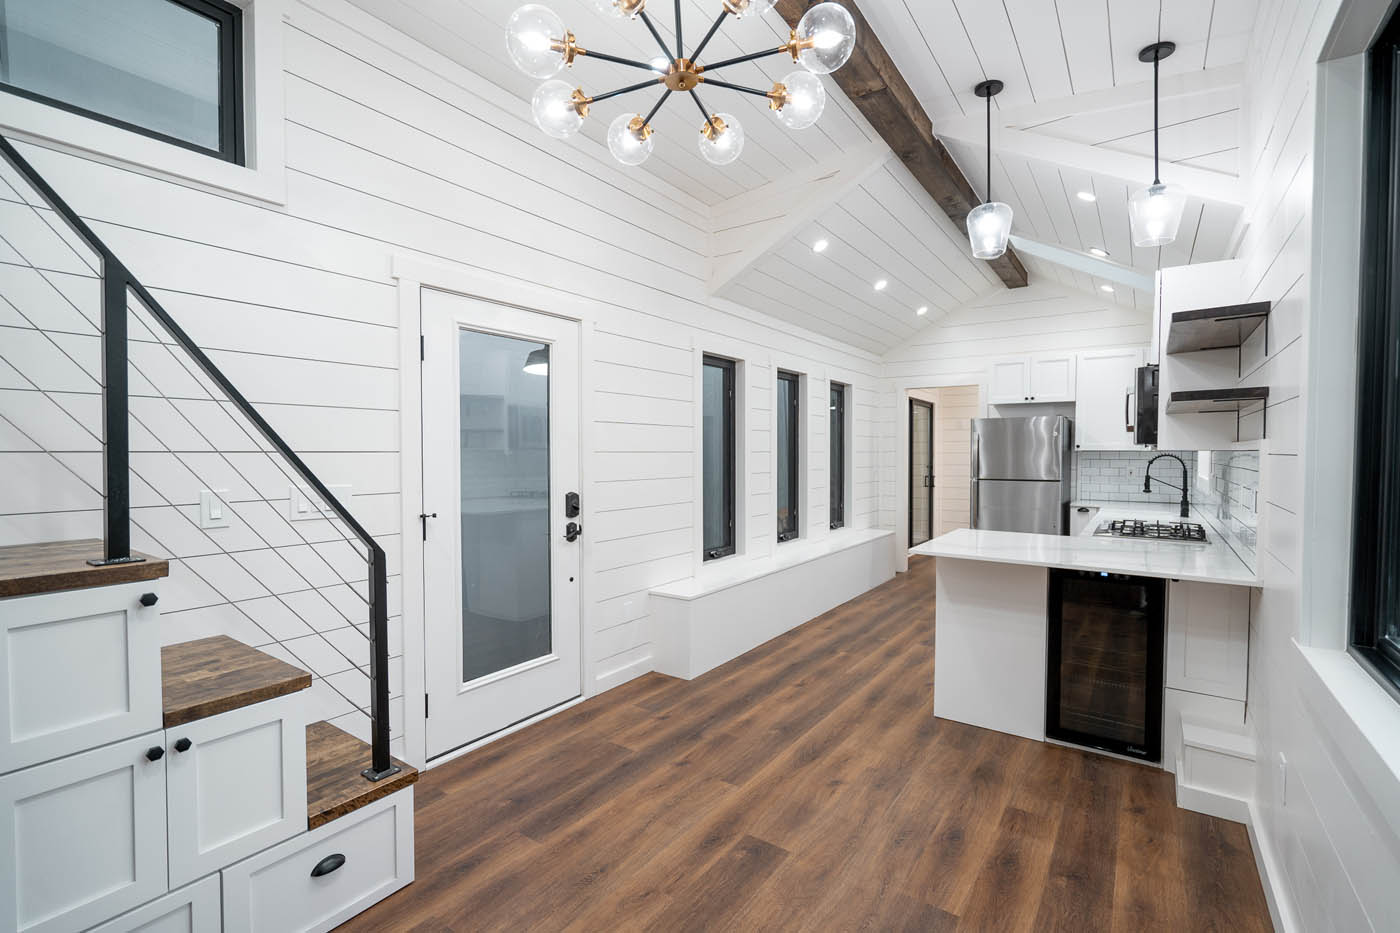 A modern home with dark floors and white kitchen cabinets, provided by one of the best Simpsonville / Laurens tiny house companies.